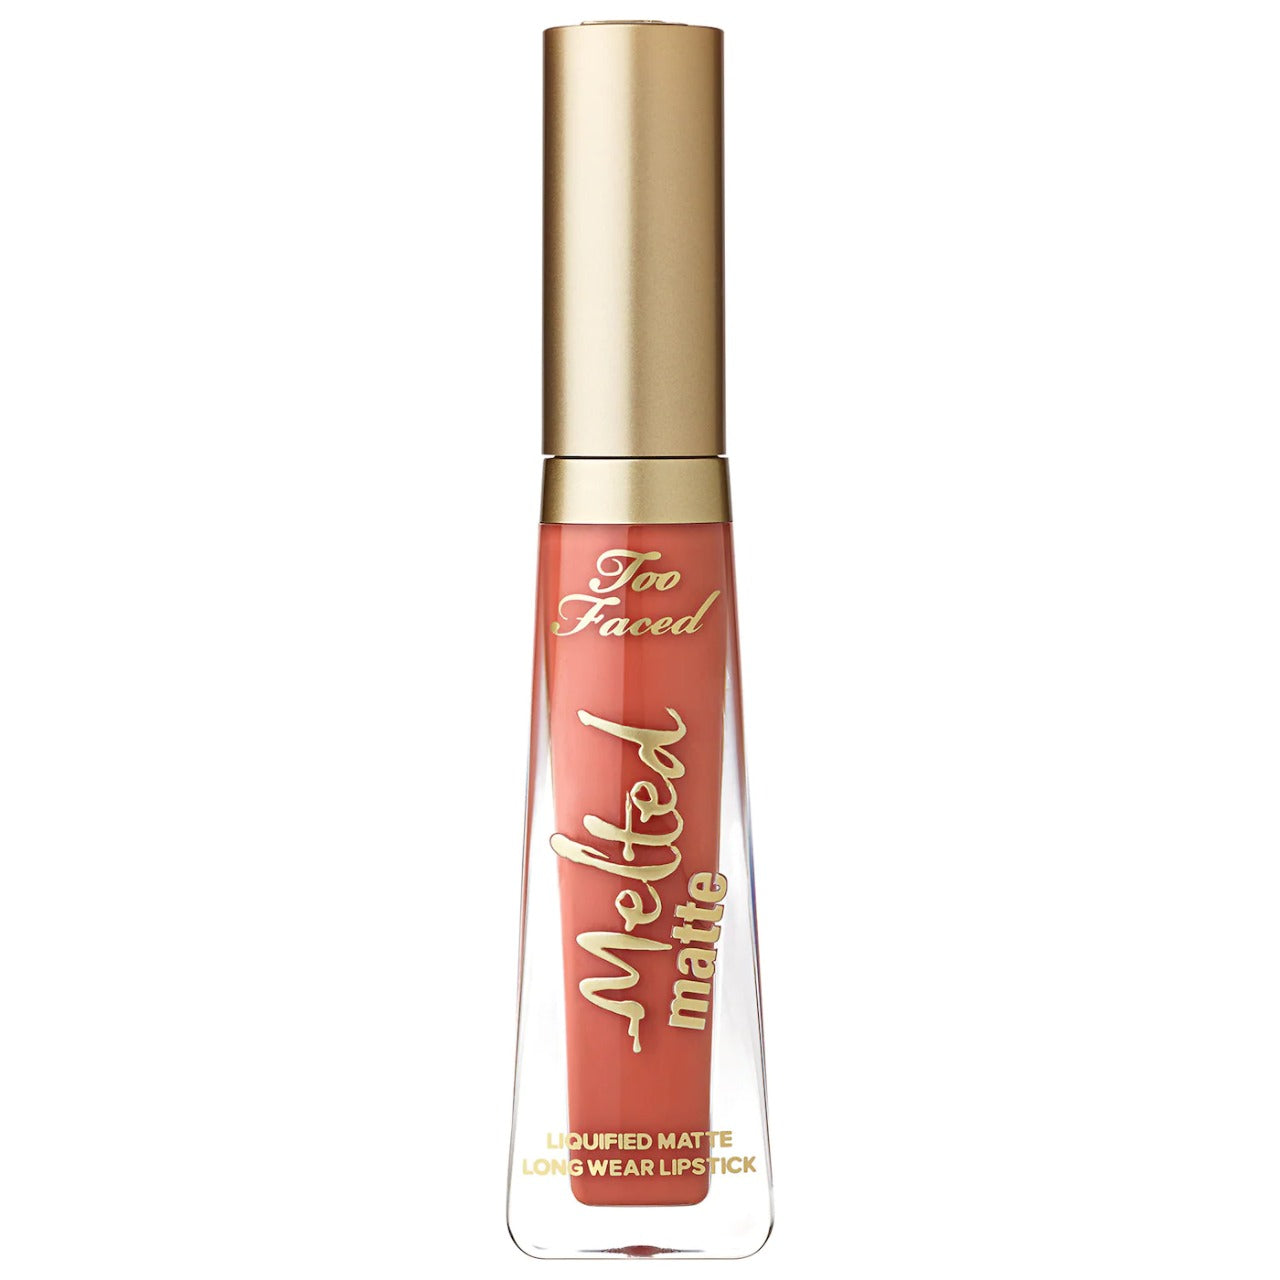 Too Faced - Melted Matte Liquid Lipstick - Prissy (TZ)